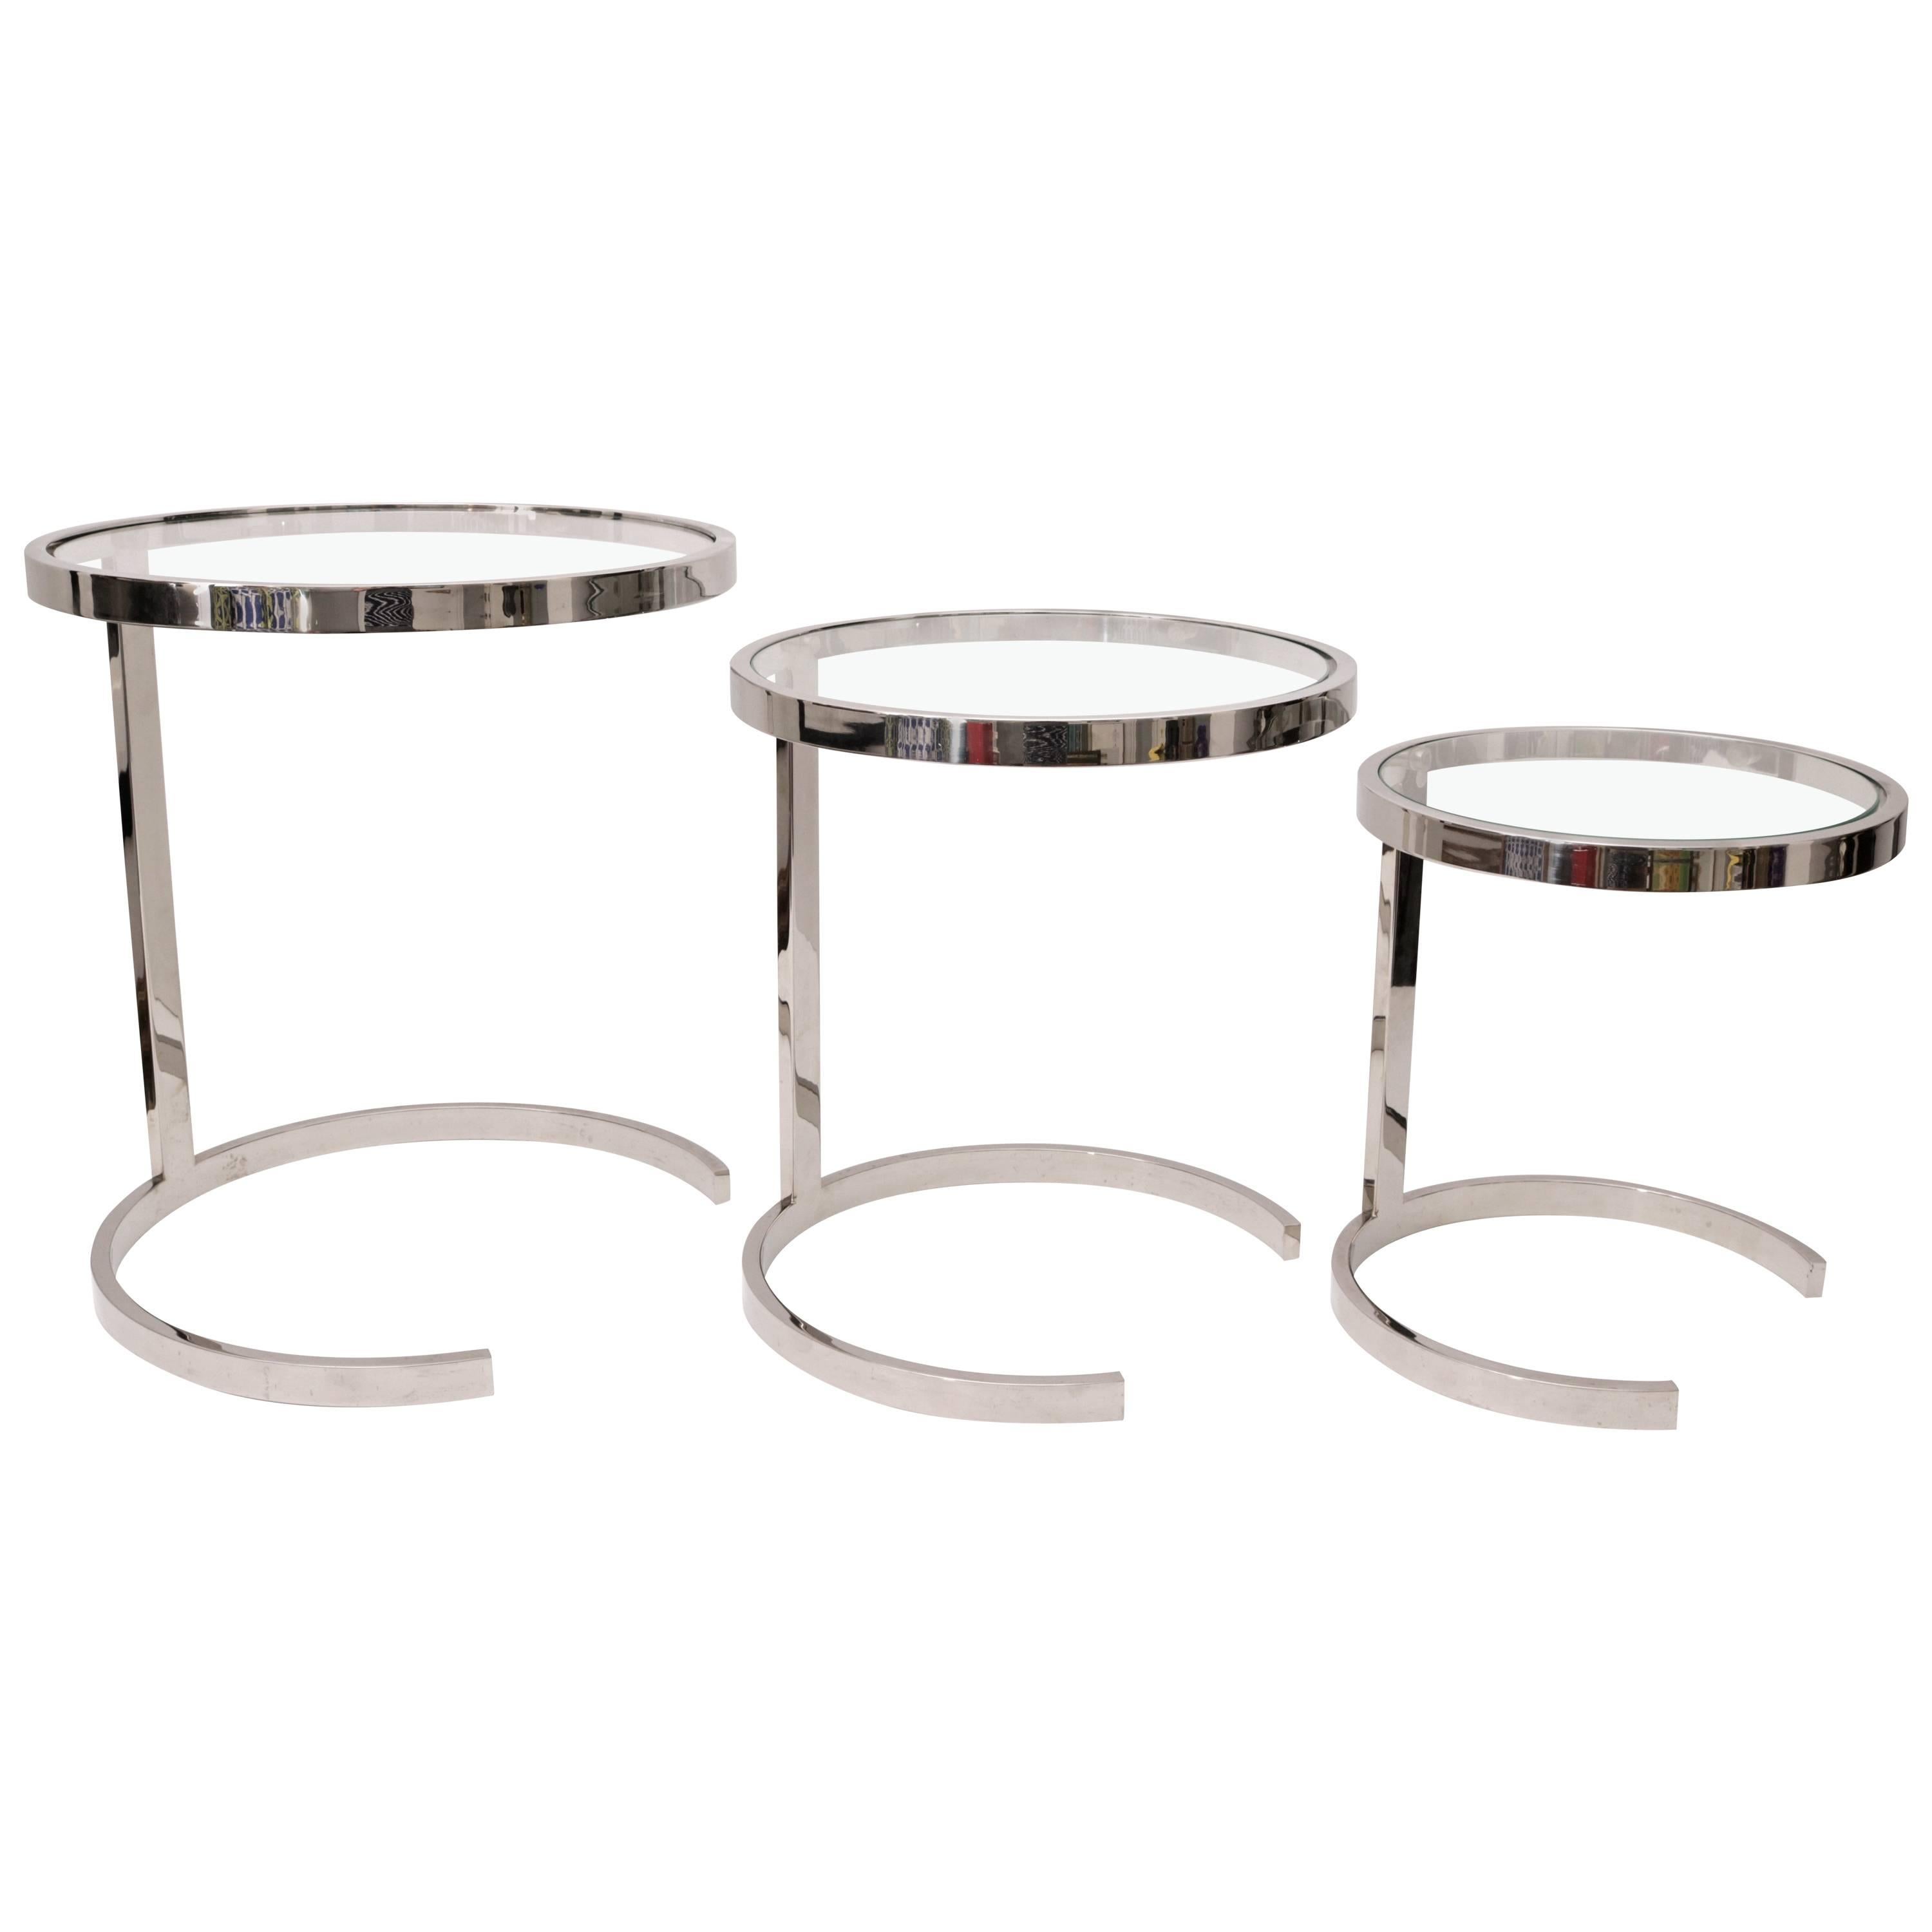 Brueton, Set of Three Nesting Tables in Polished Steel and Glass